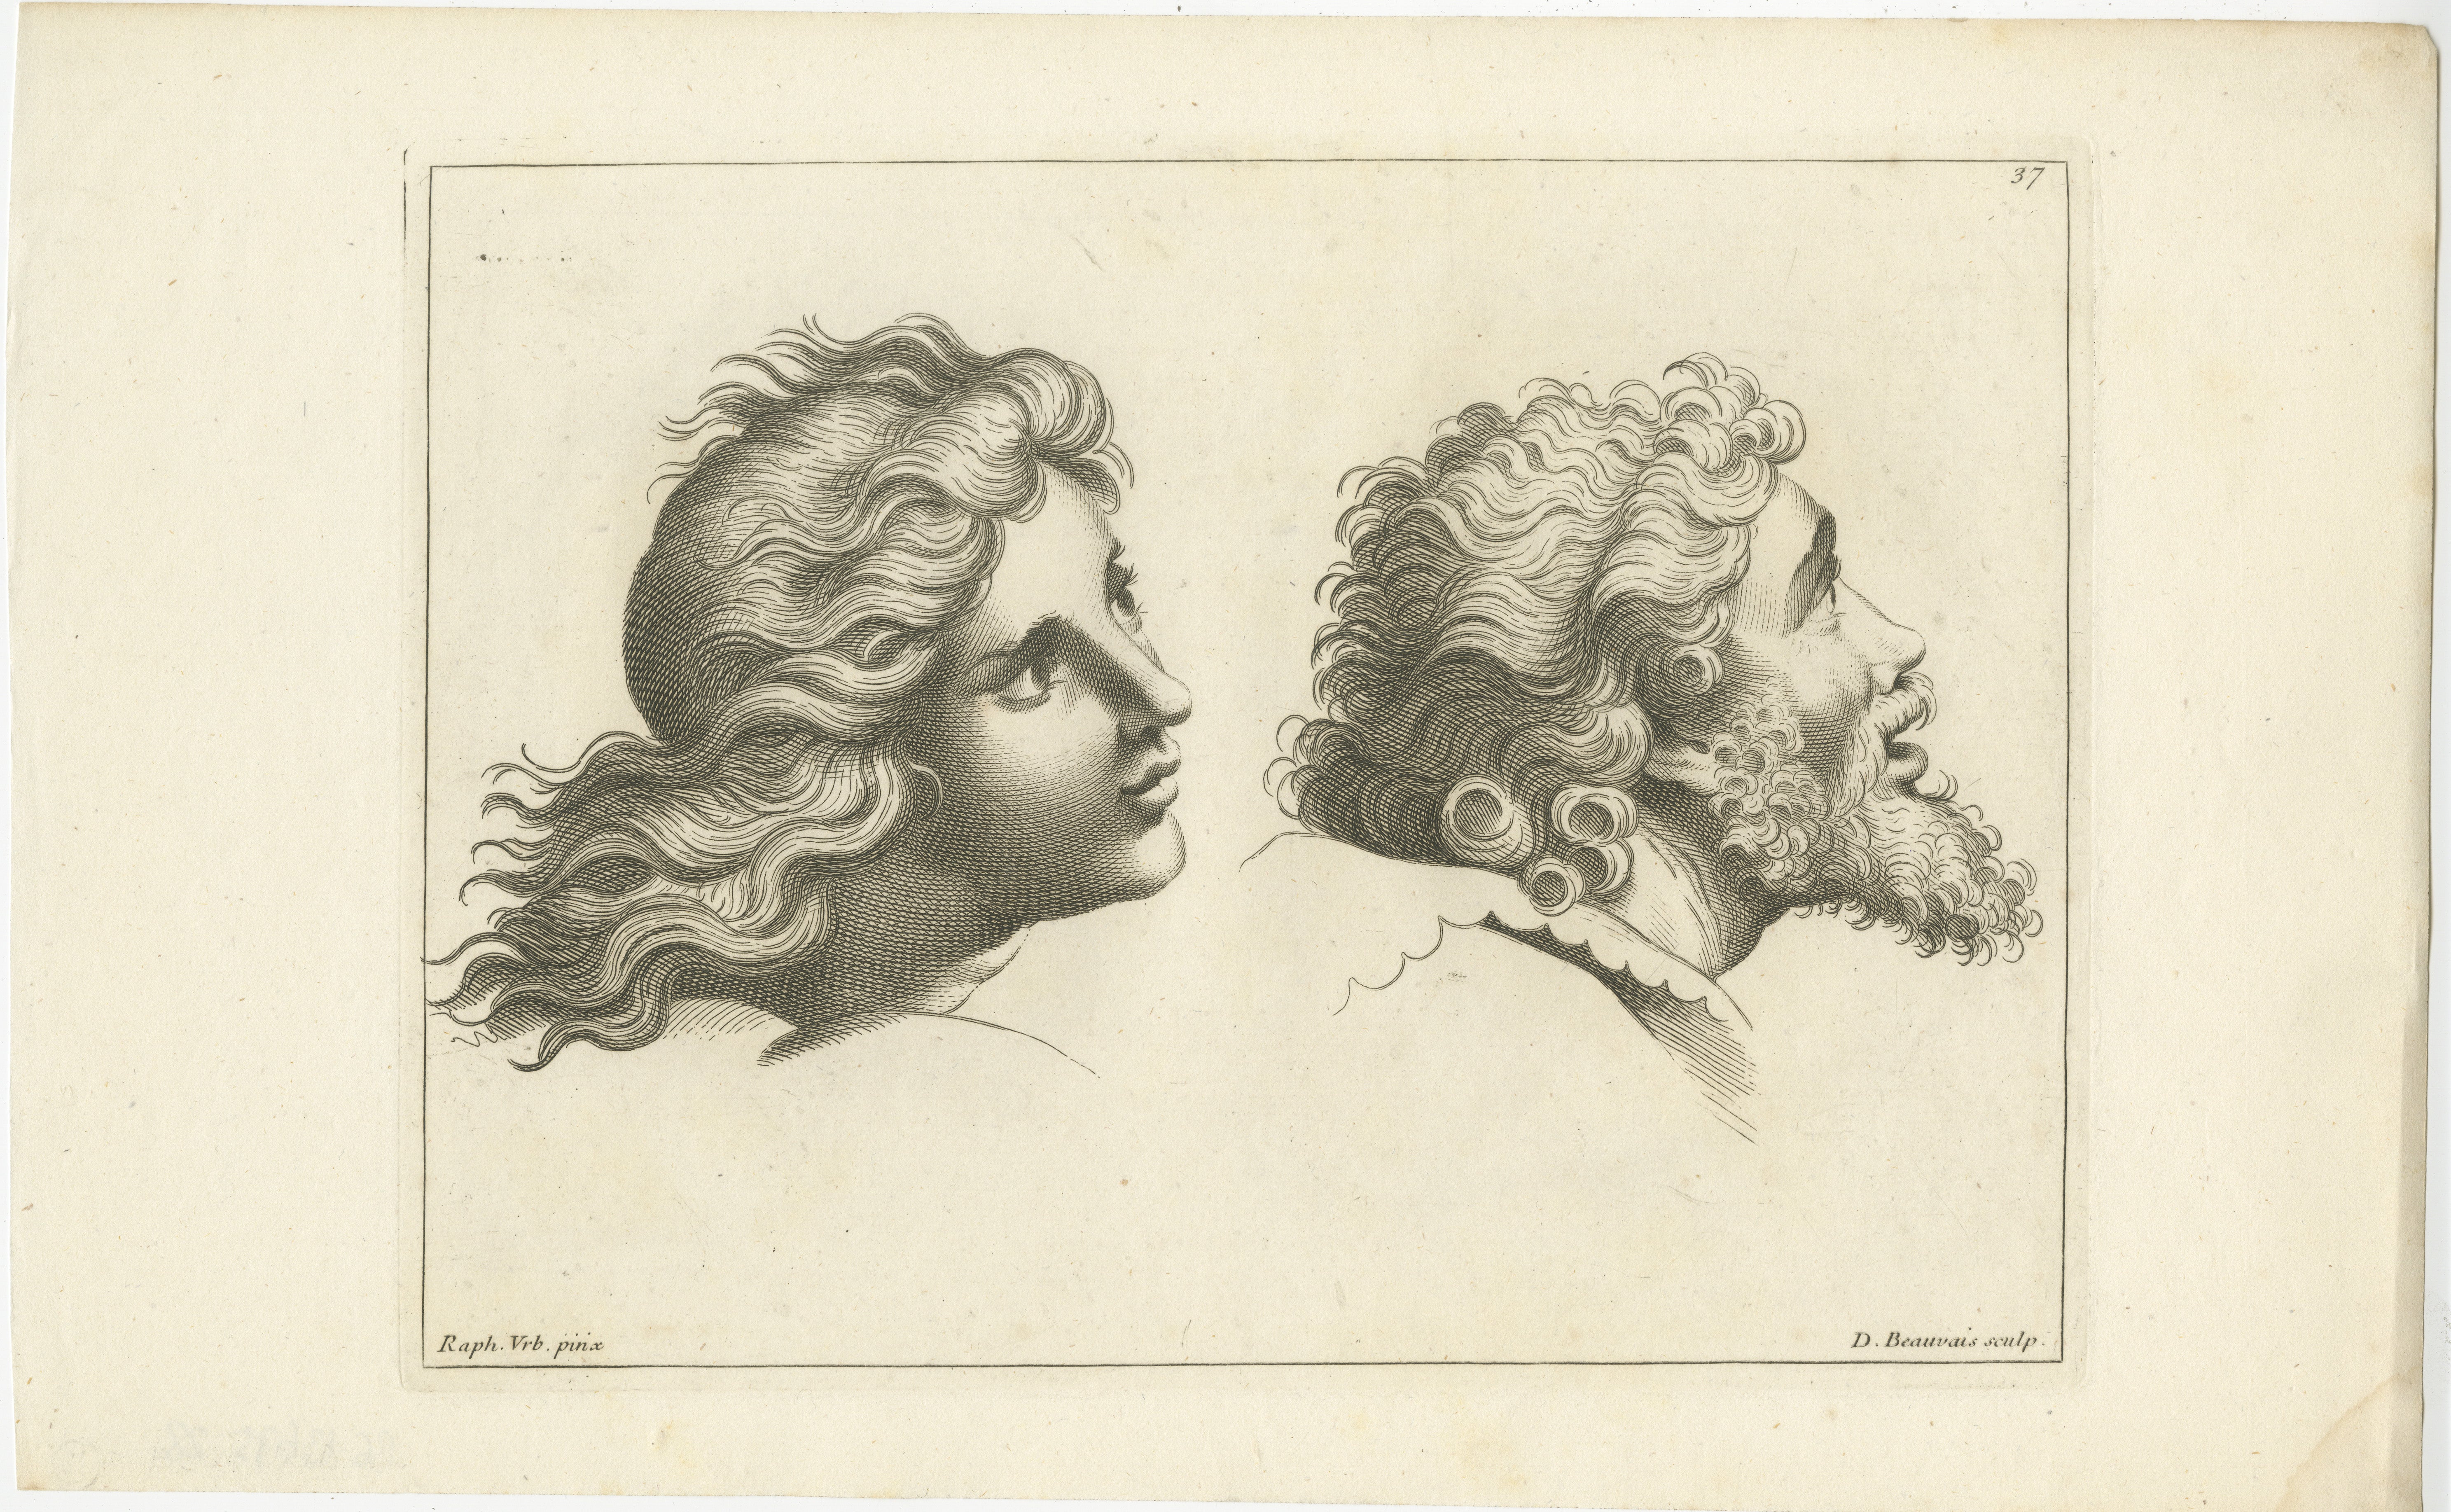 This engraving a compelling piece featuring two distinct profiles: one of a youthful figure with soft, flowing hair and the other of an older, bearded individual whose face is marked with the signs of age and character.

On the left, the subject's